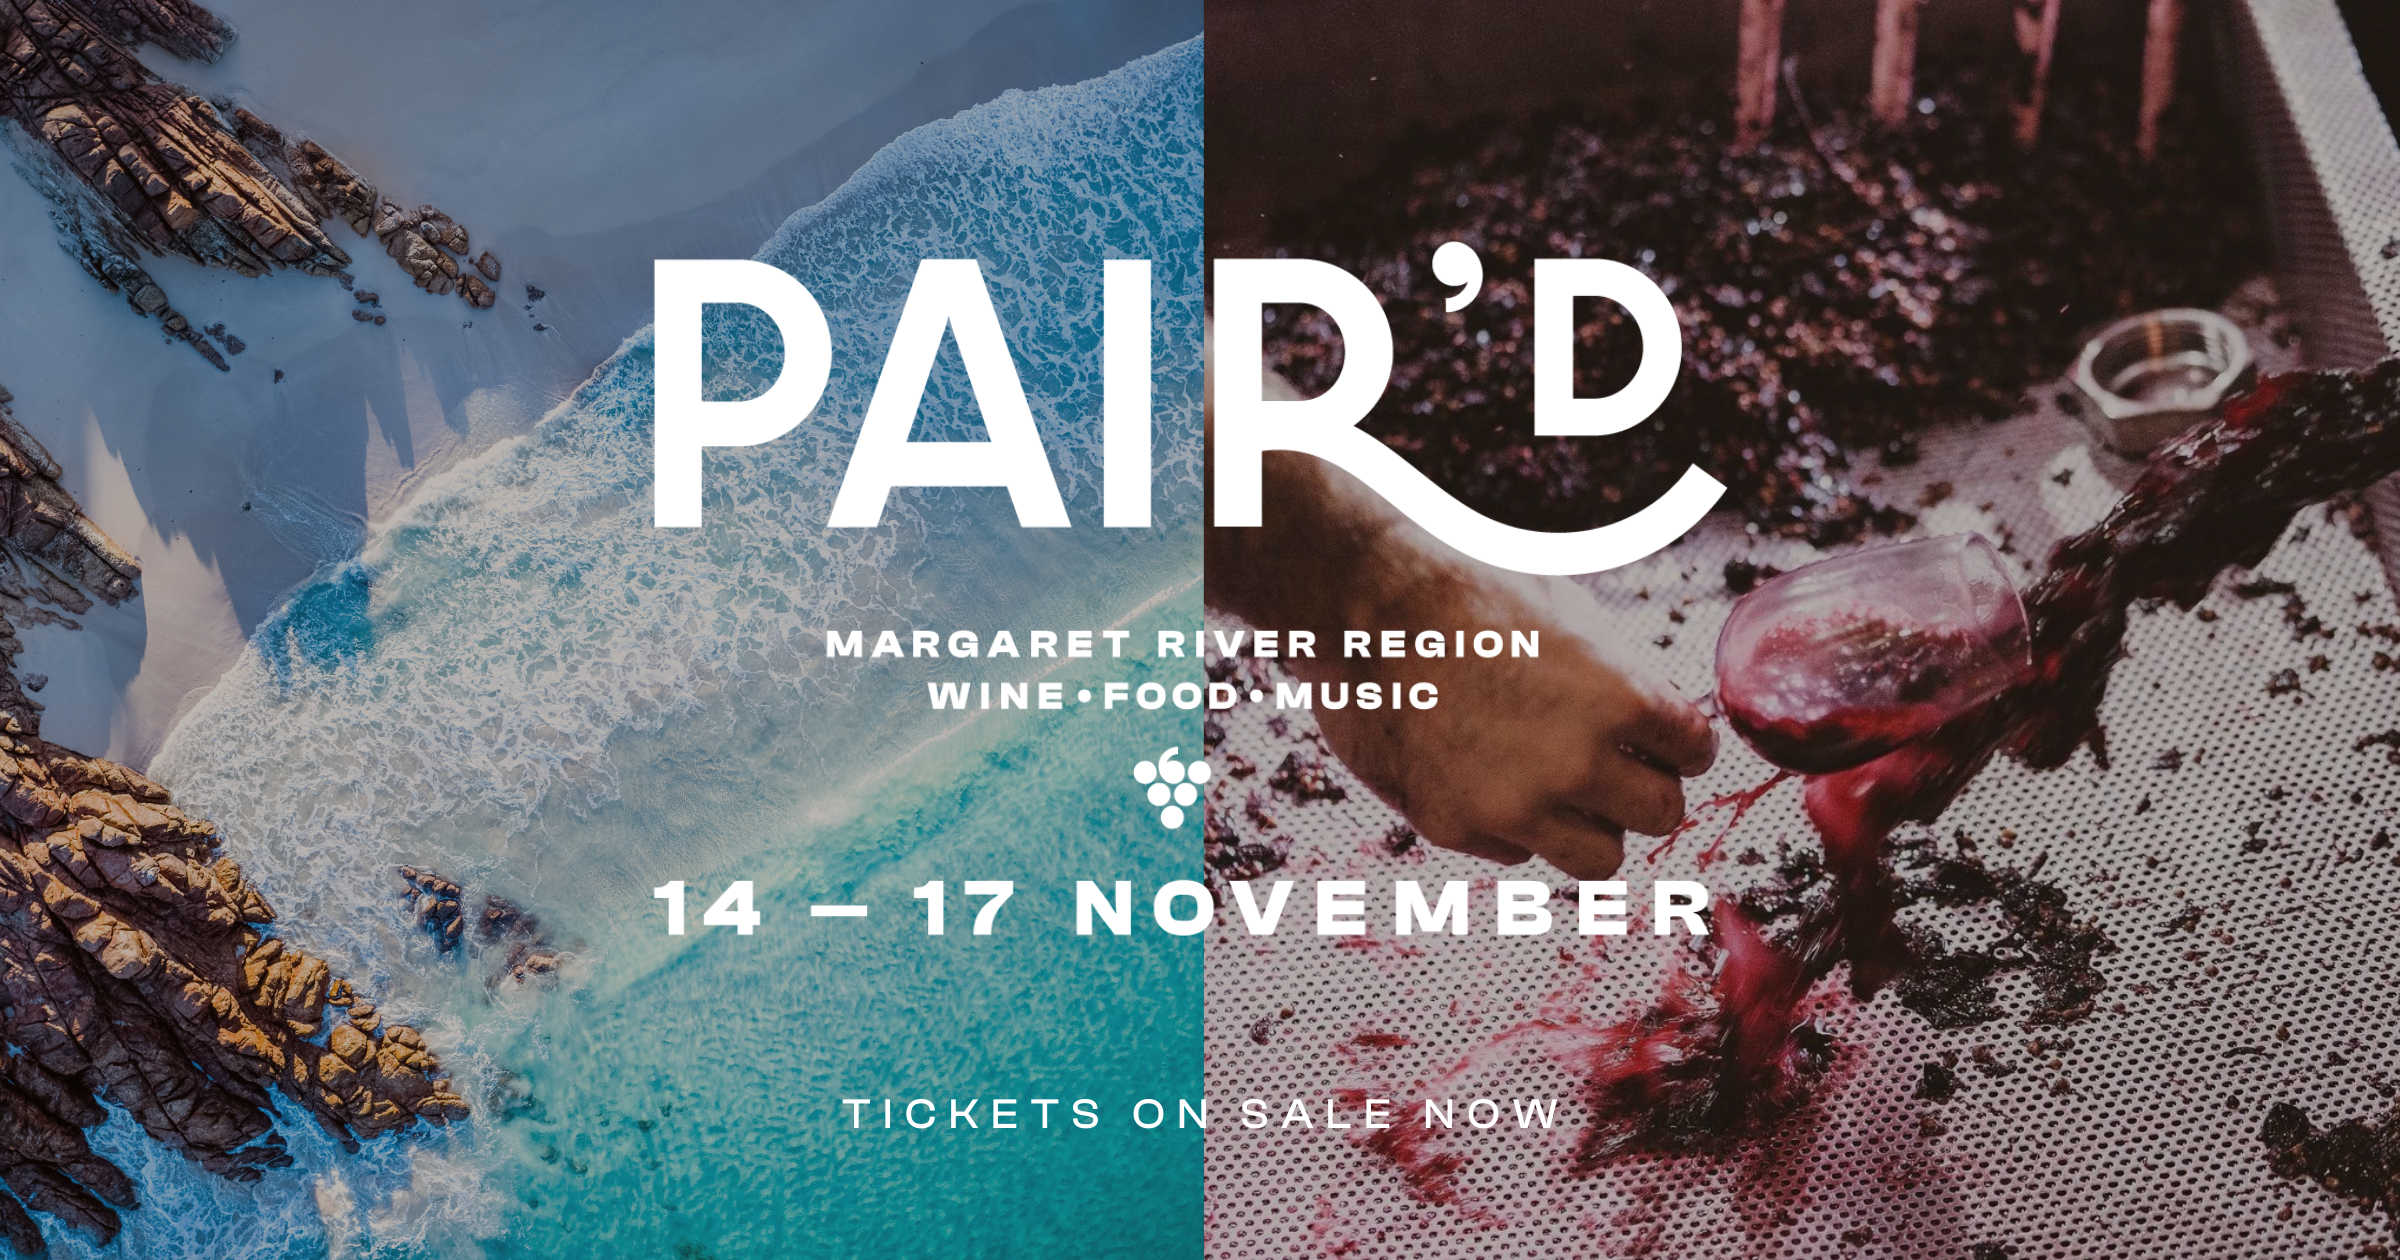 Get Ready To Wine At Pair'd Margaret River Region!